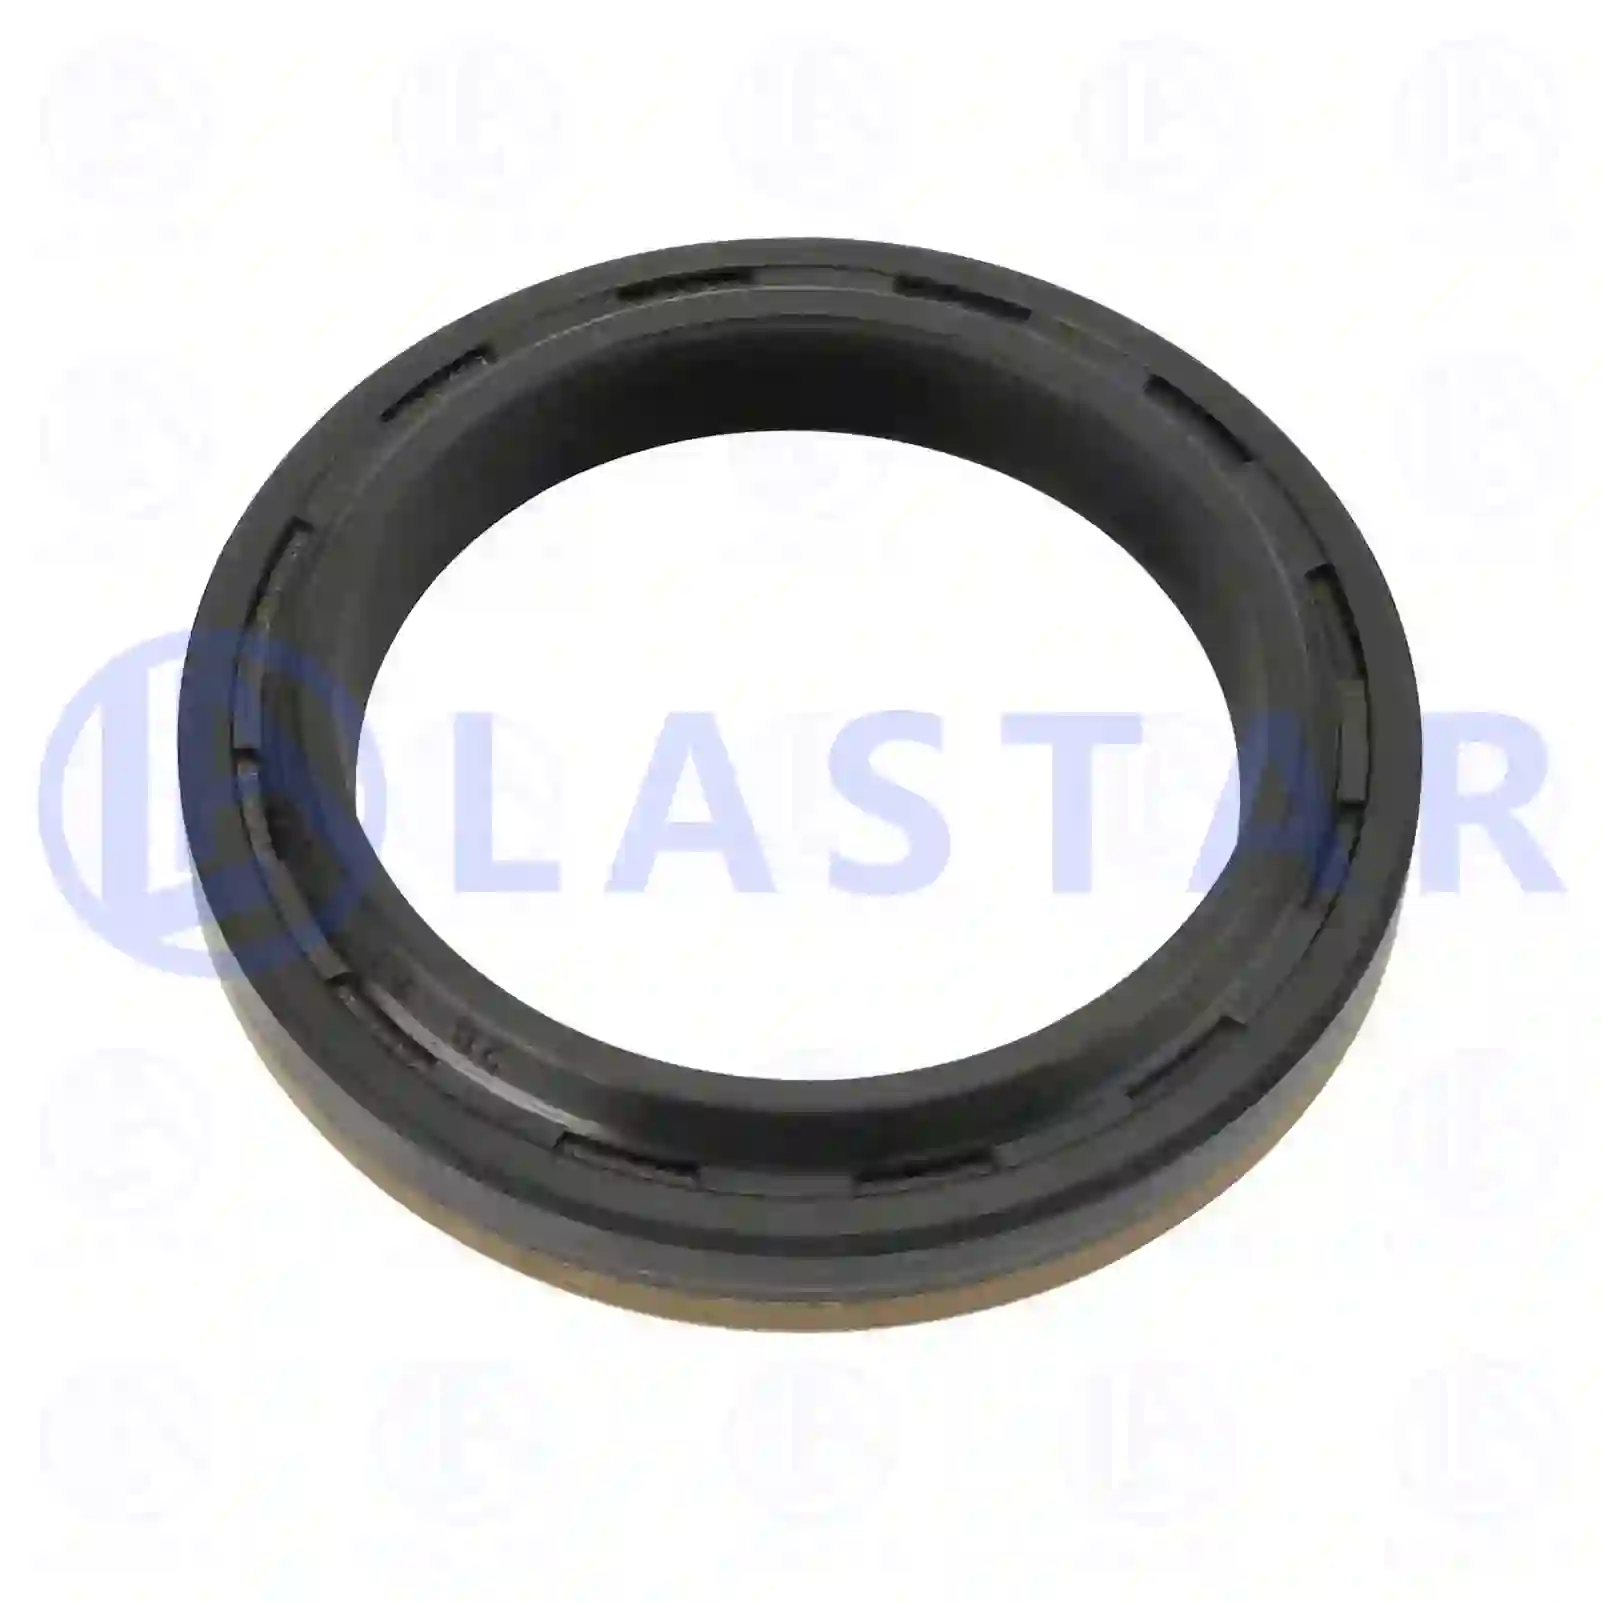 Oil seal, 77732132, 1652780, 1669562, , , ||  77732132 Lastar Spare Part | Truck Spare Parts, Auotomotive Spare Parts Oil seal, 77732132, 1652780, 1669562, , , ||  77732132 Lastar Spare Part | Truck Spare Parts, Auotomotive Spare Parts